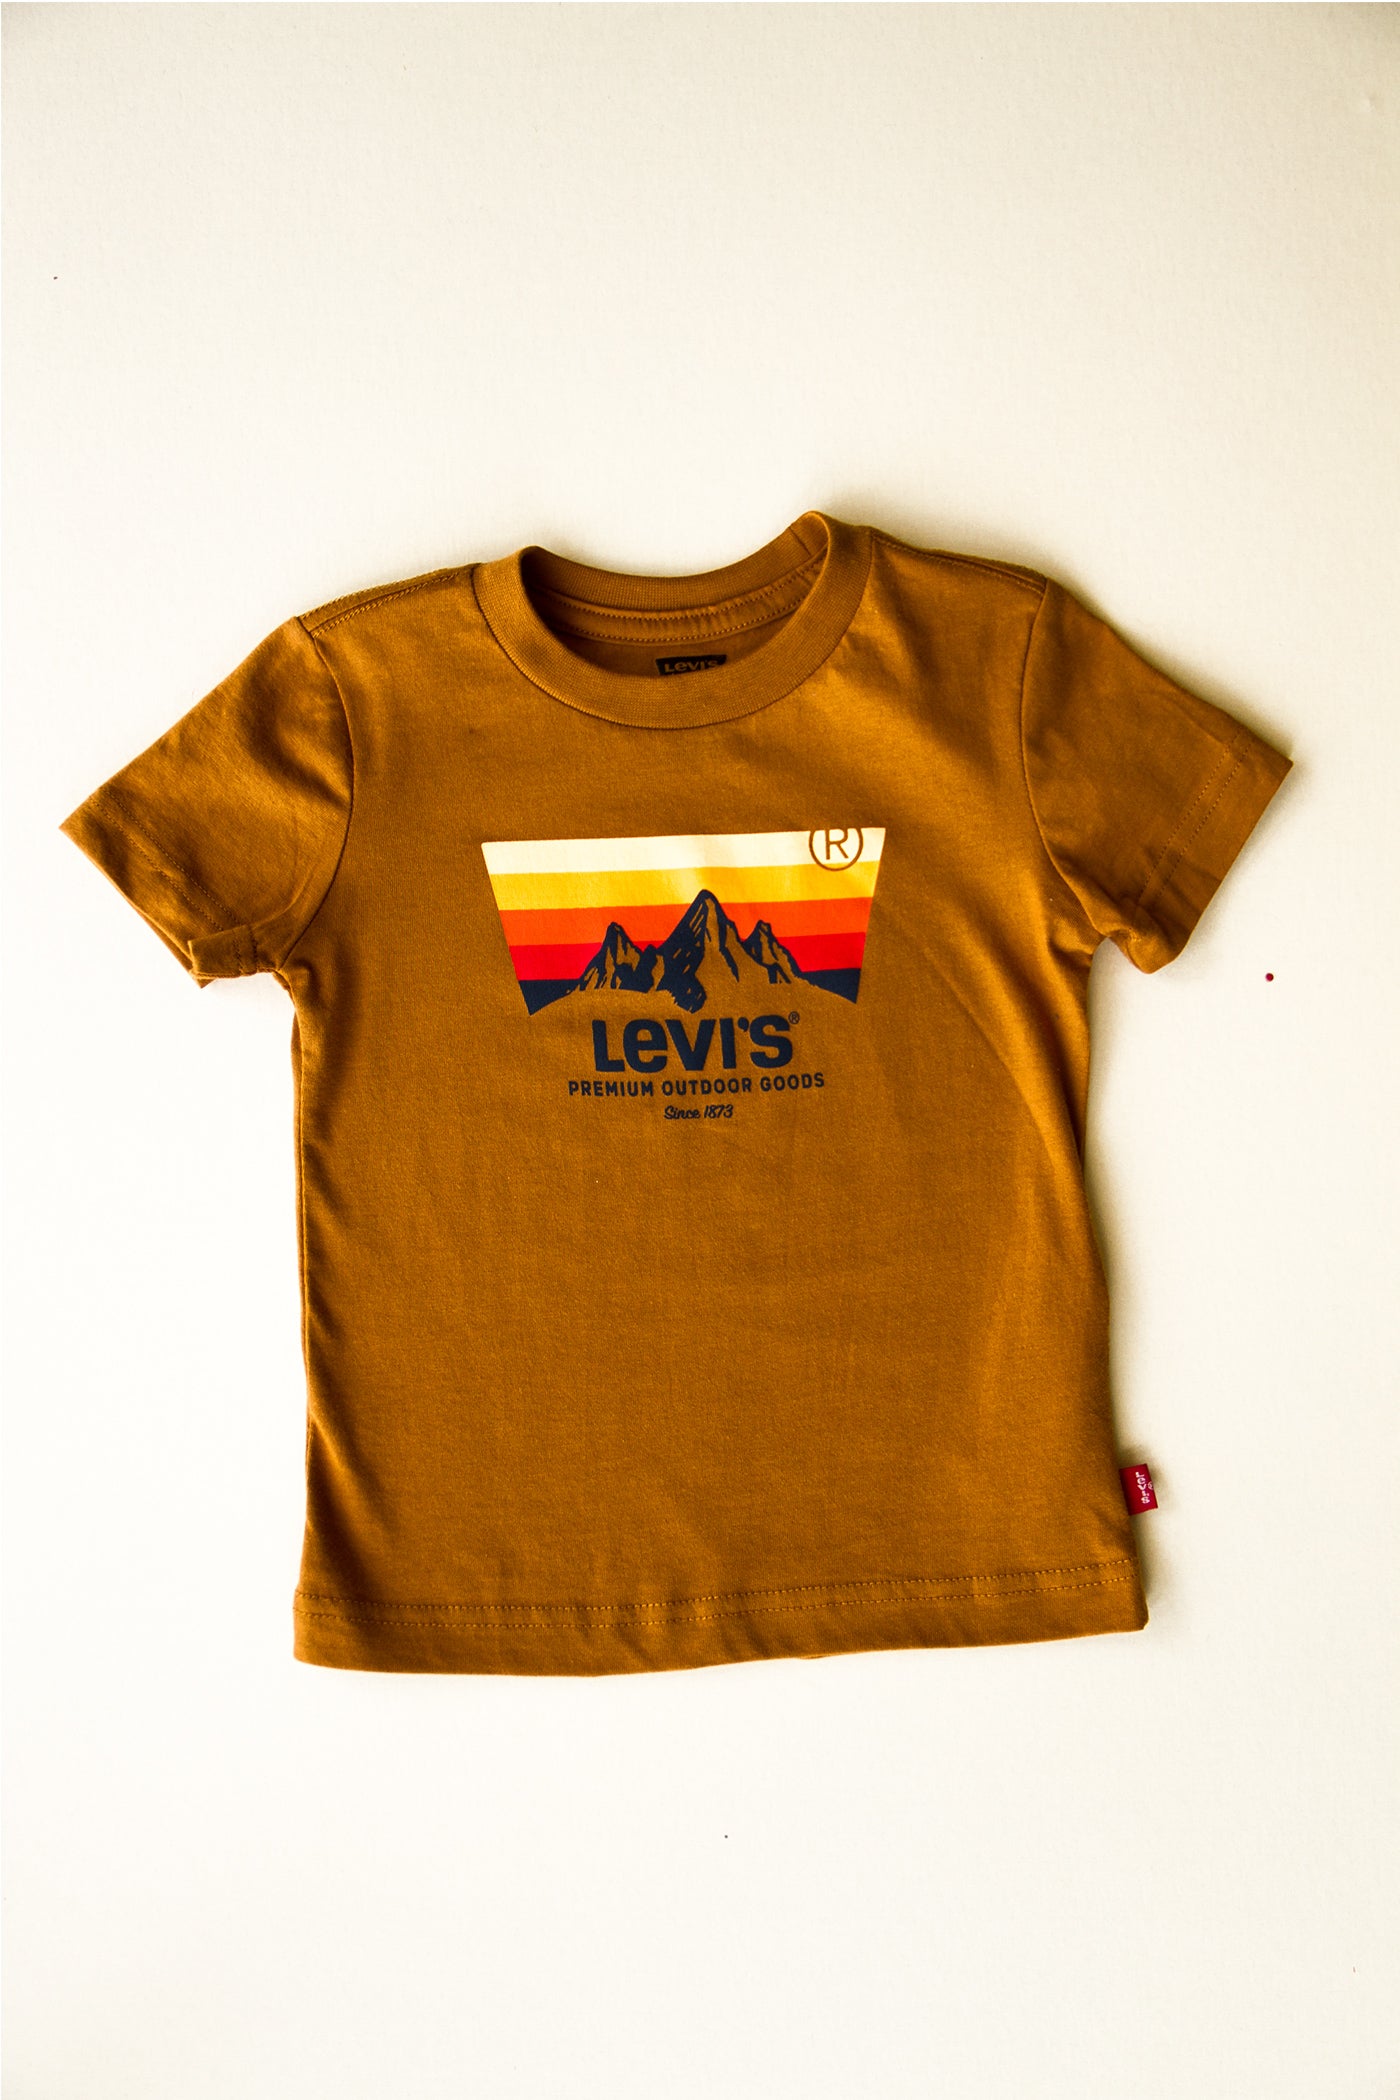 Levi's Outdoor Goods Graphic Kids Tee by Levi's